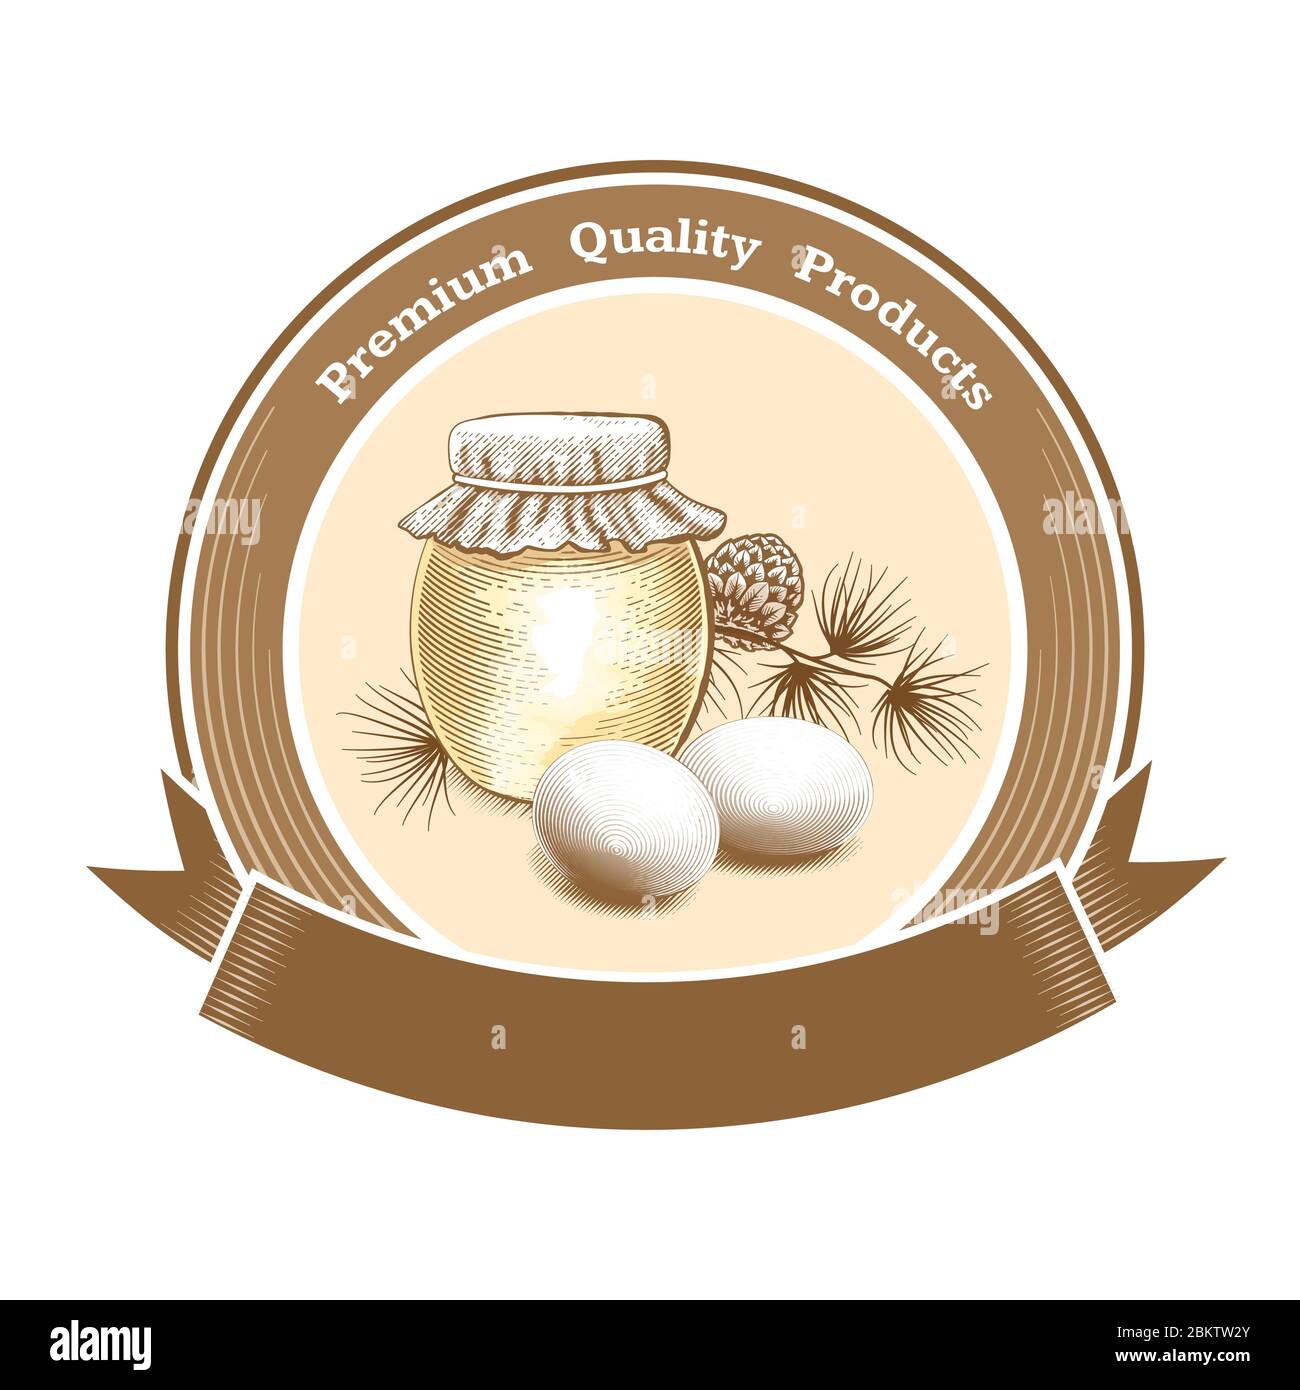 Vector vinage round label for farm or grocery with eggs, honey jar and text Premium Quality Products. Place for text. Stock Vector